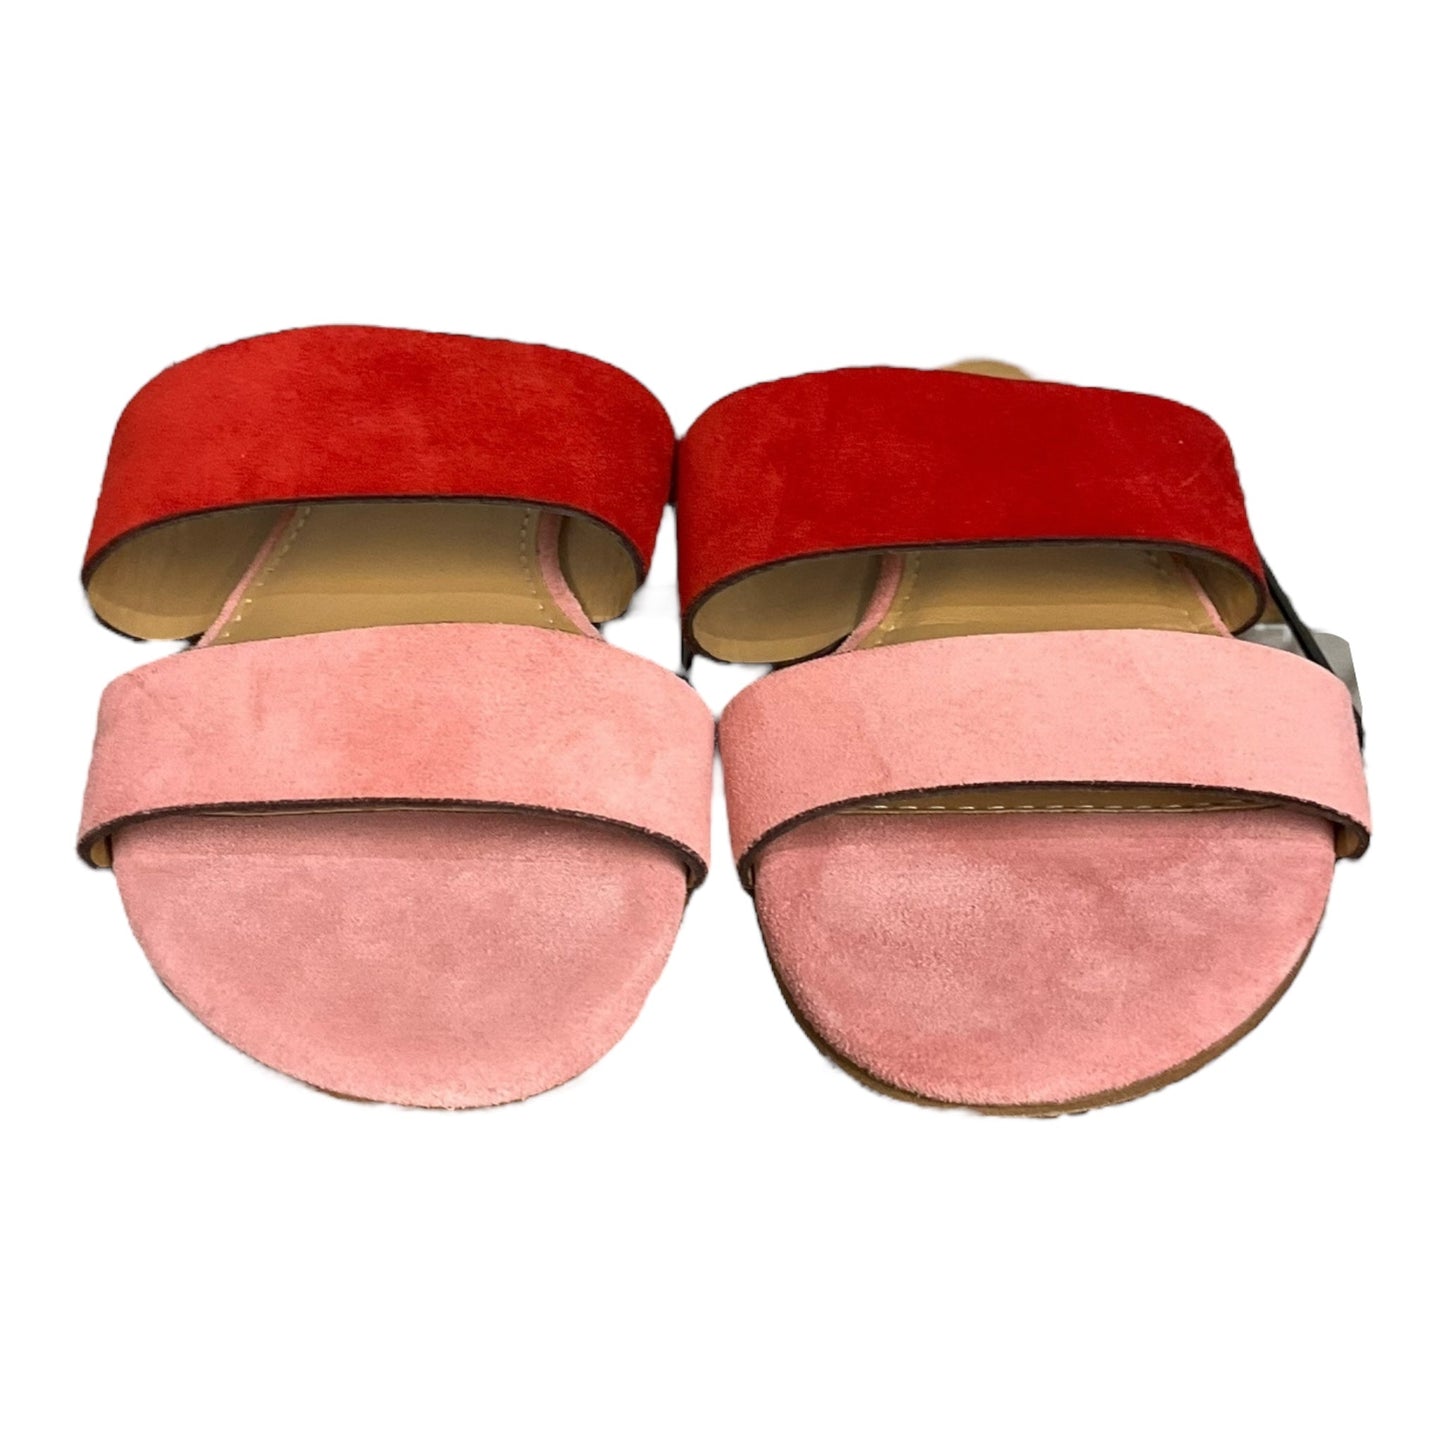 Pink & Red Sandals Flats Coach And Four, Size 5